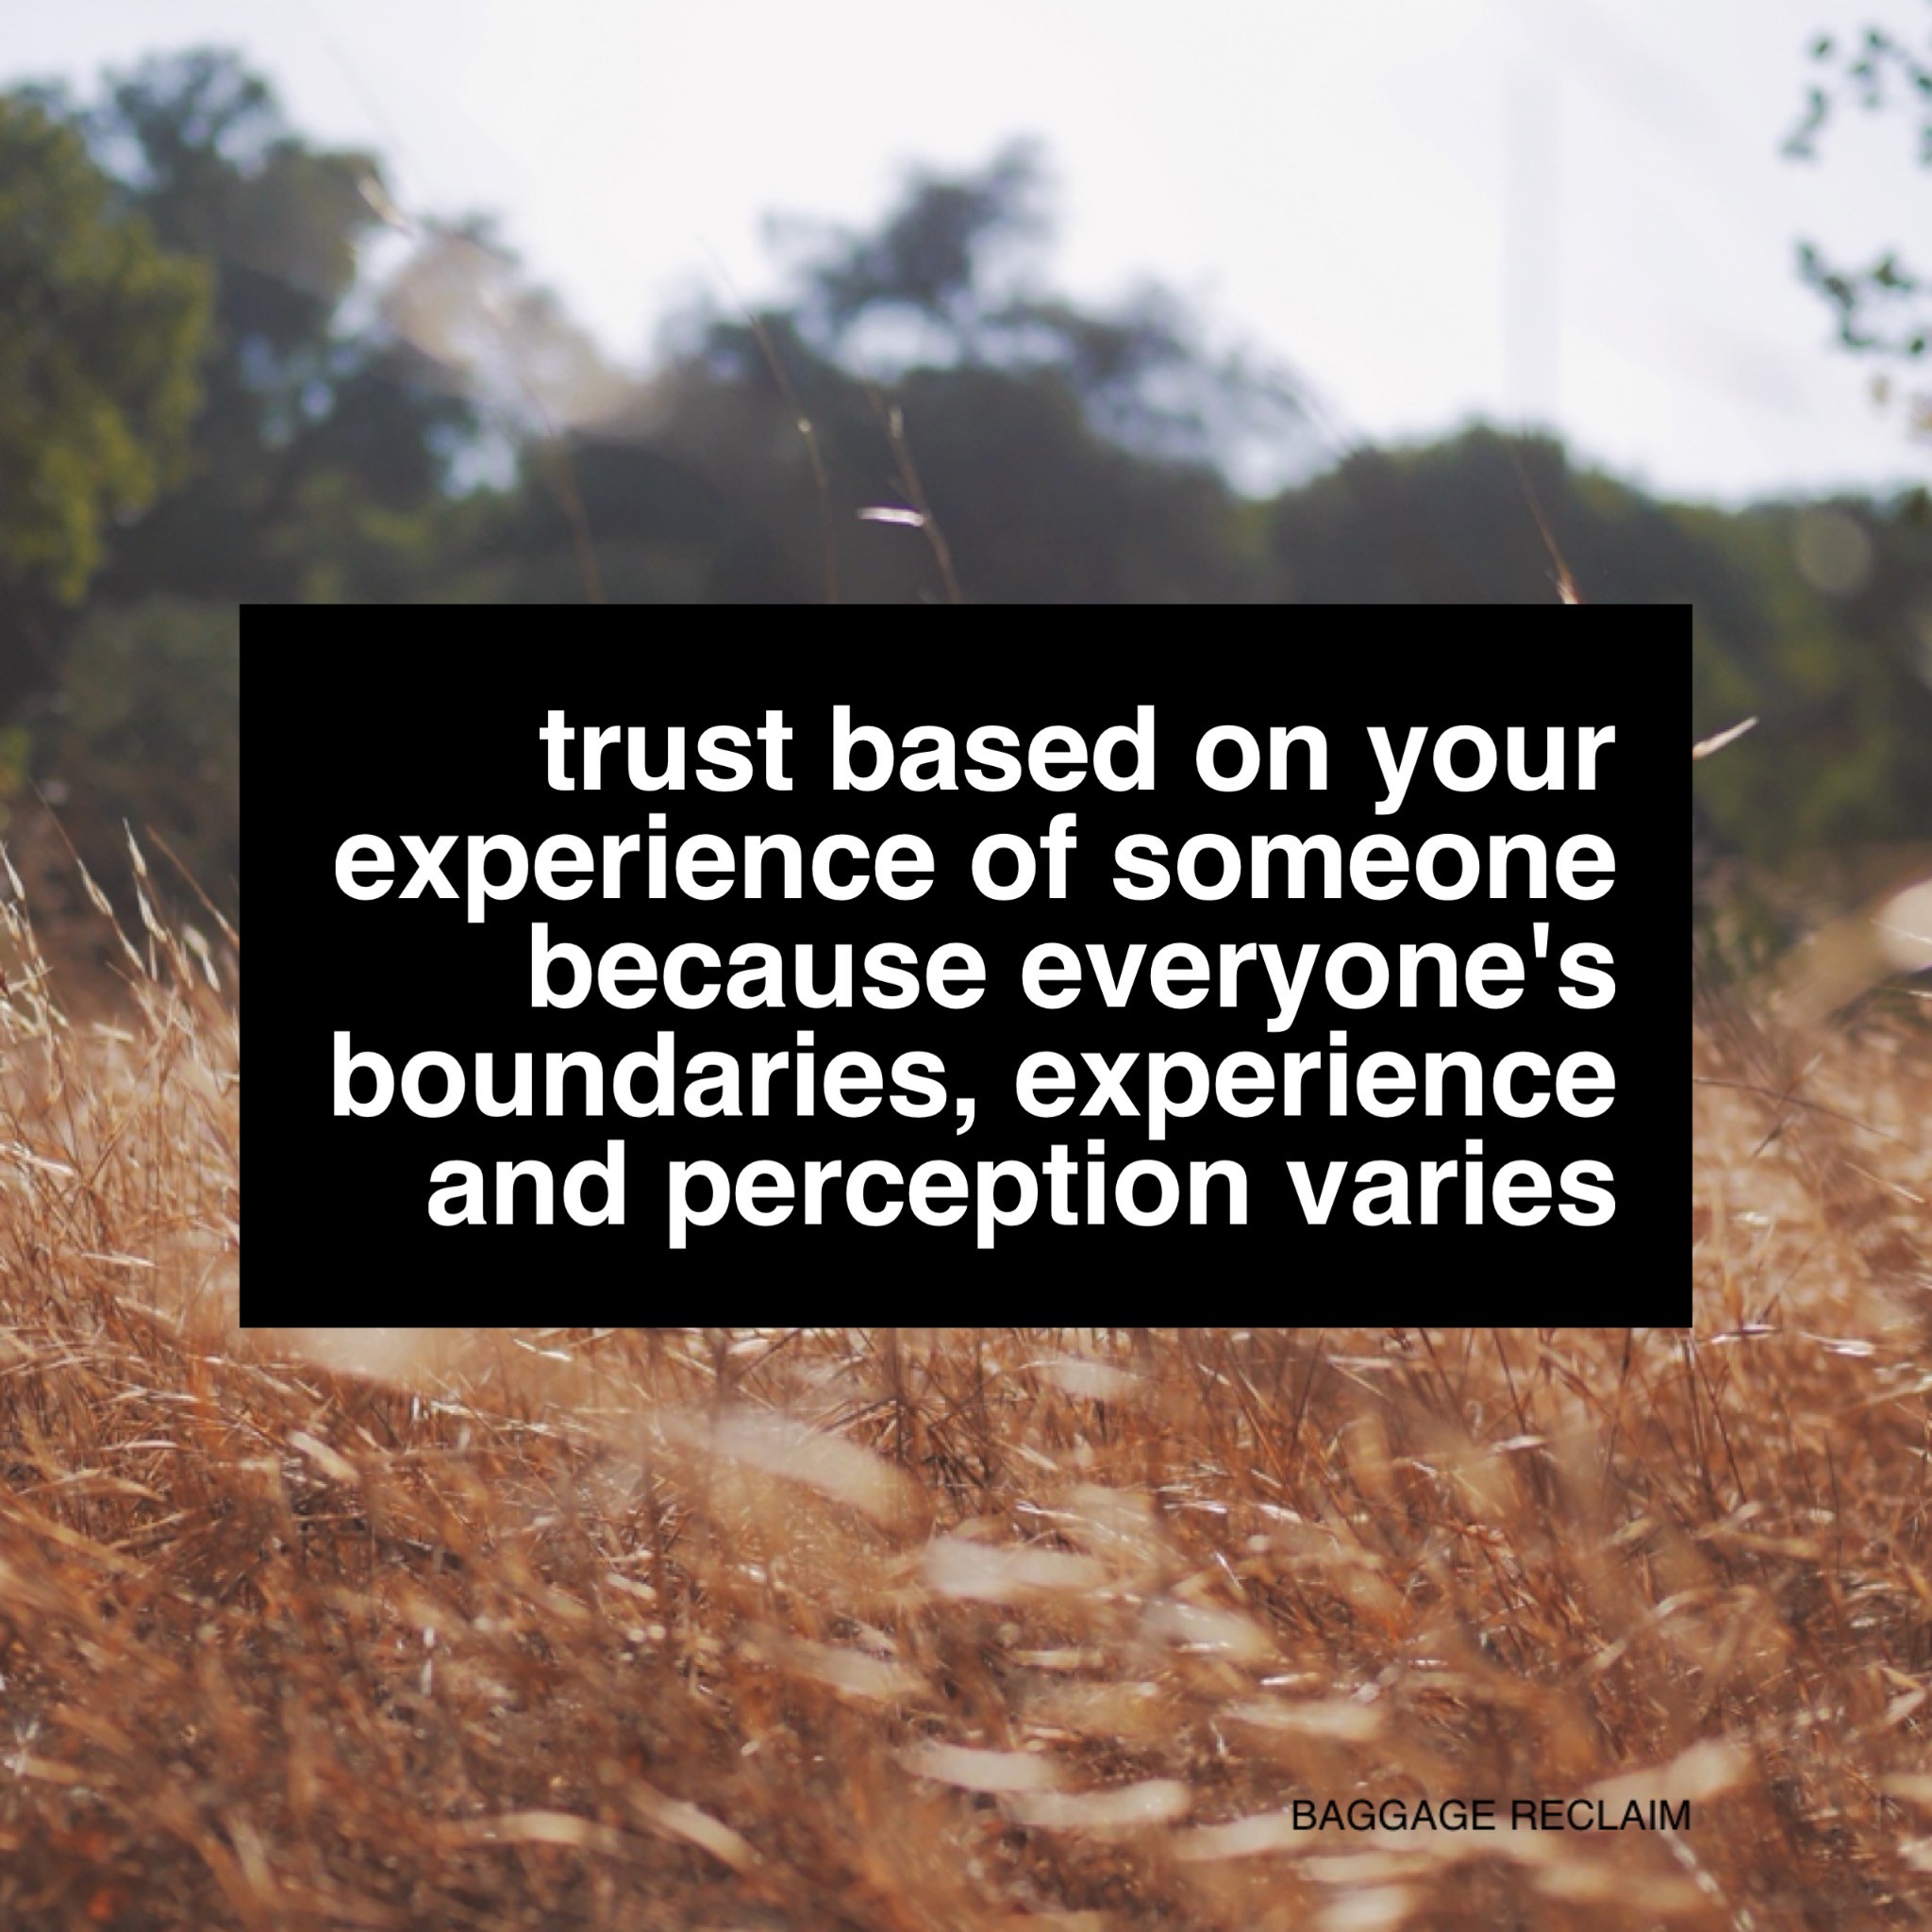 Trust based on your experience of someone because everyone's boundaries, experience and perception varies. By Nat Lue at Baggage Reclaim